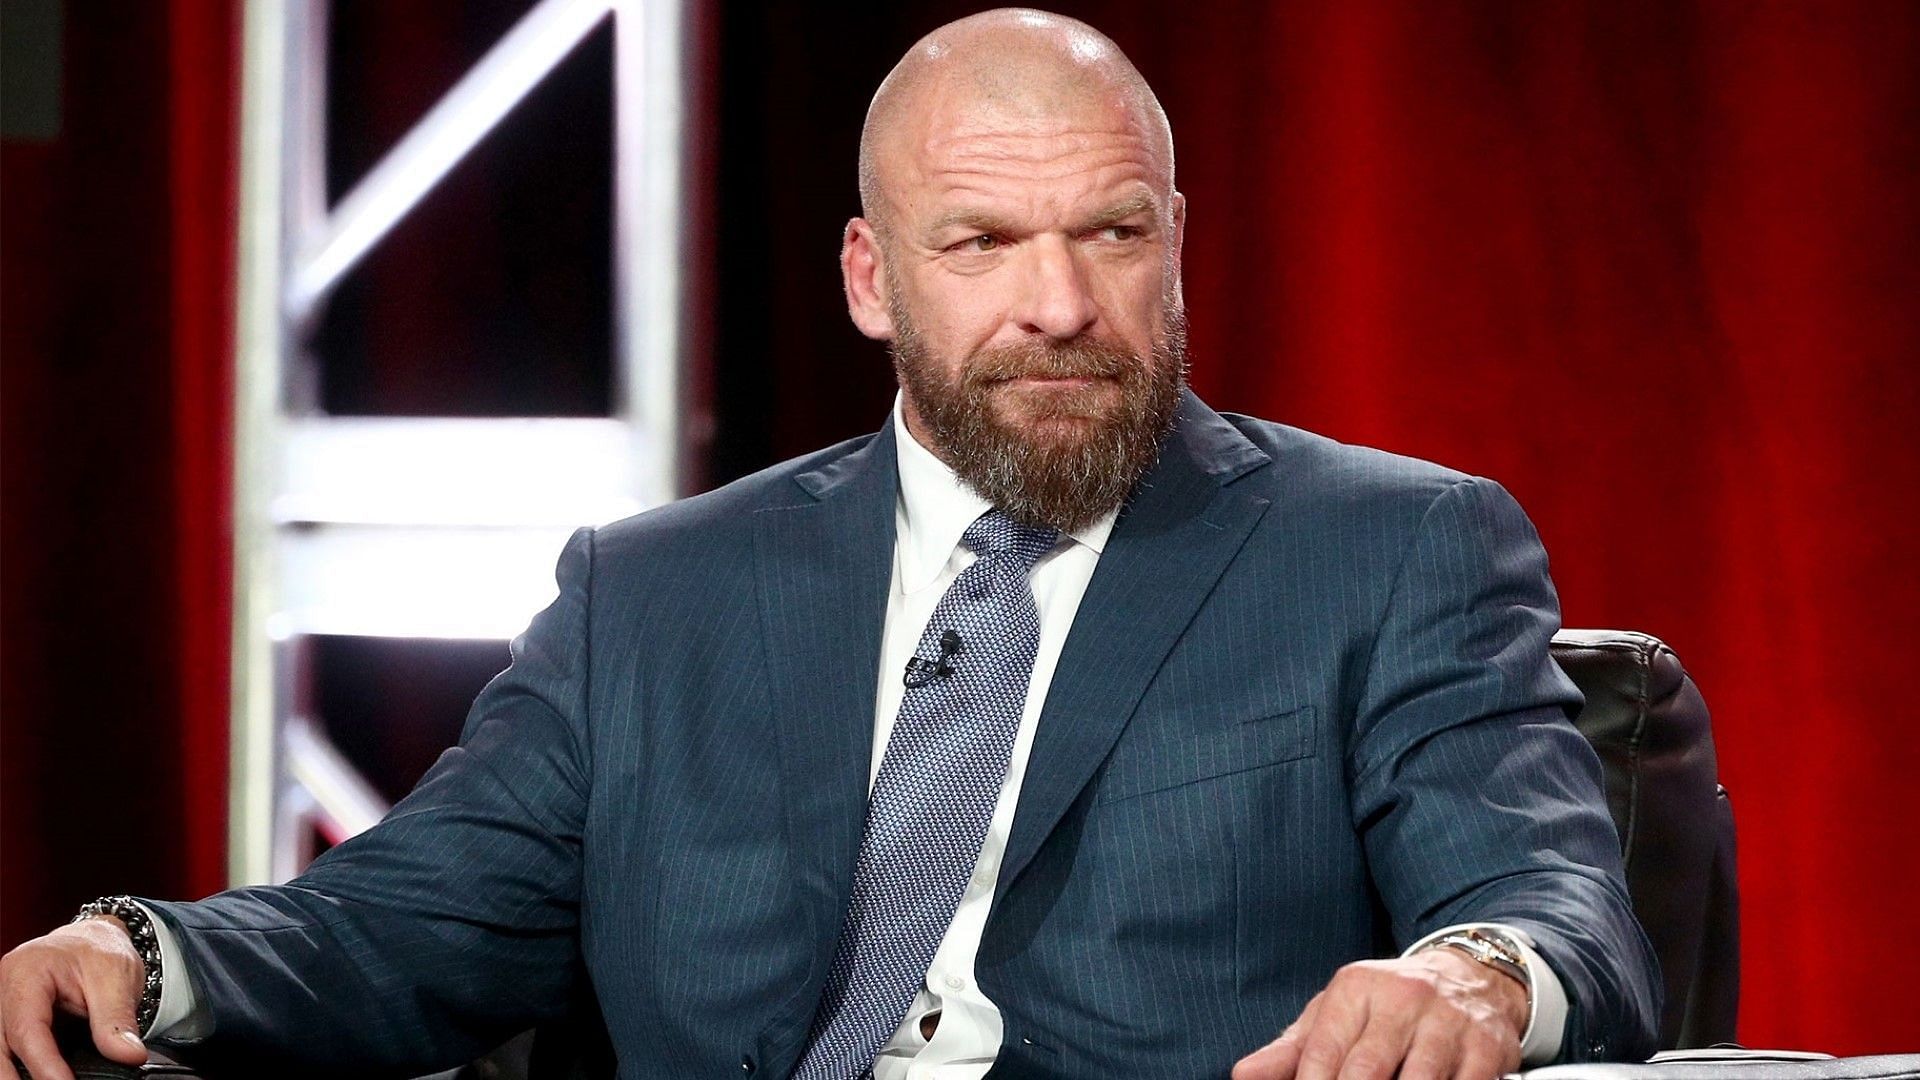 WWE Chief Content Officer Triple H speaks to fans